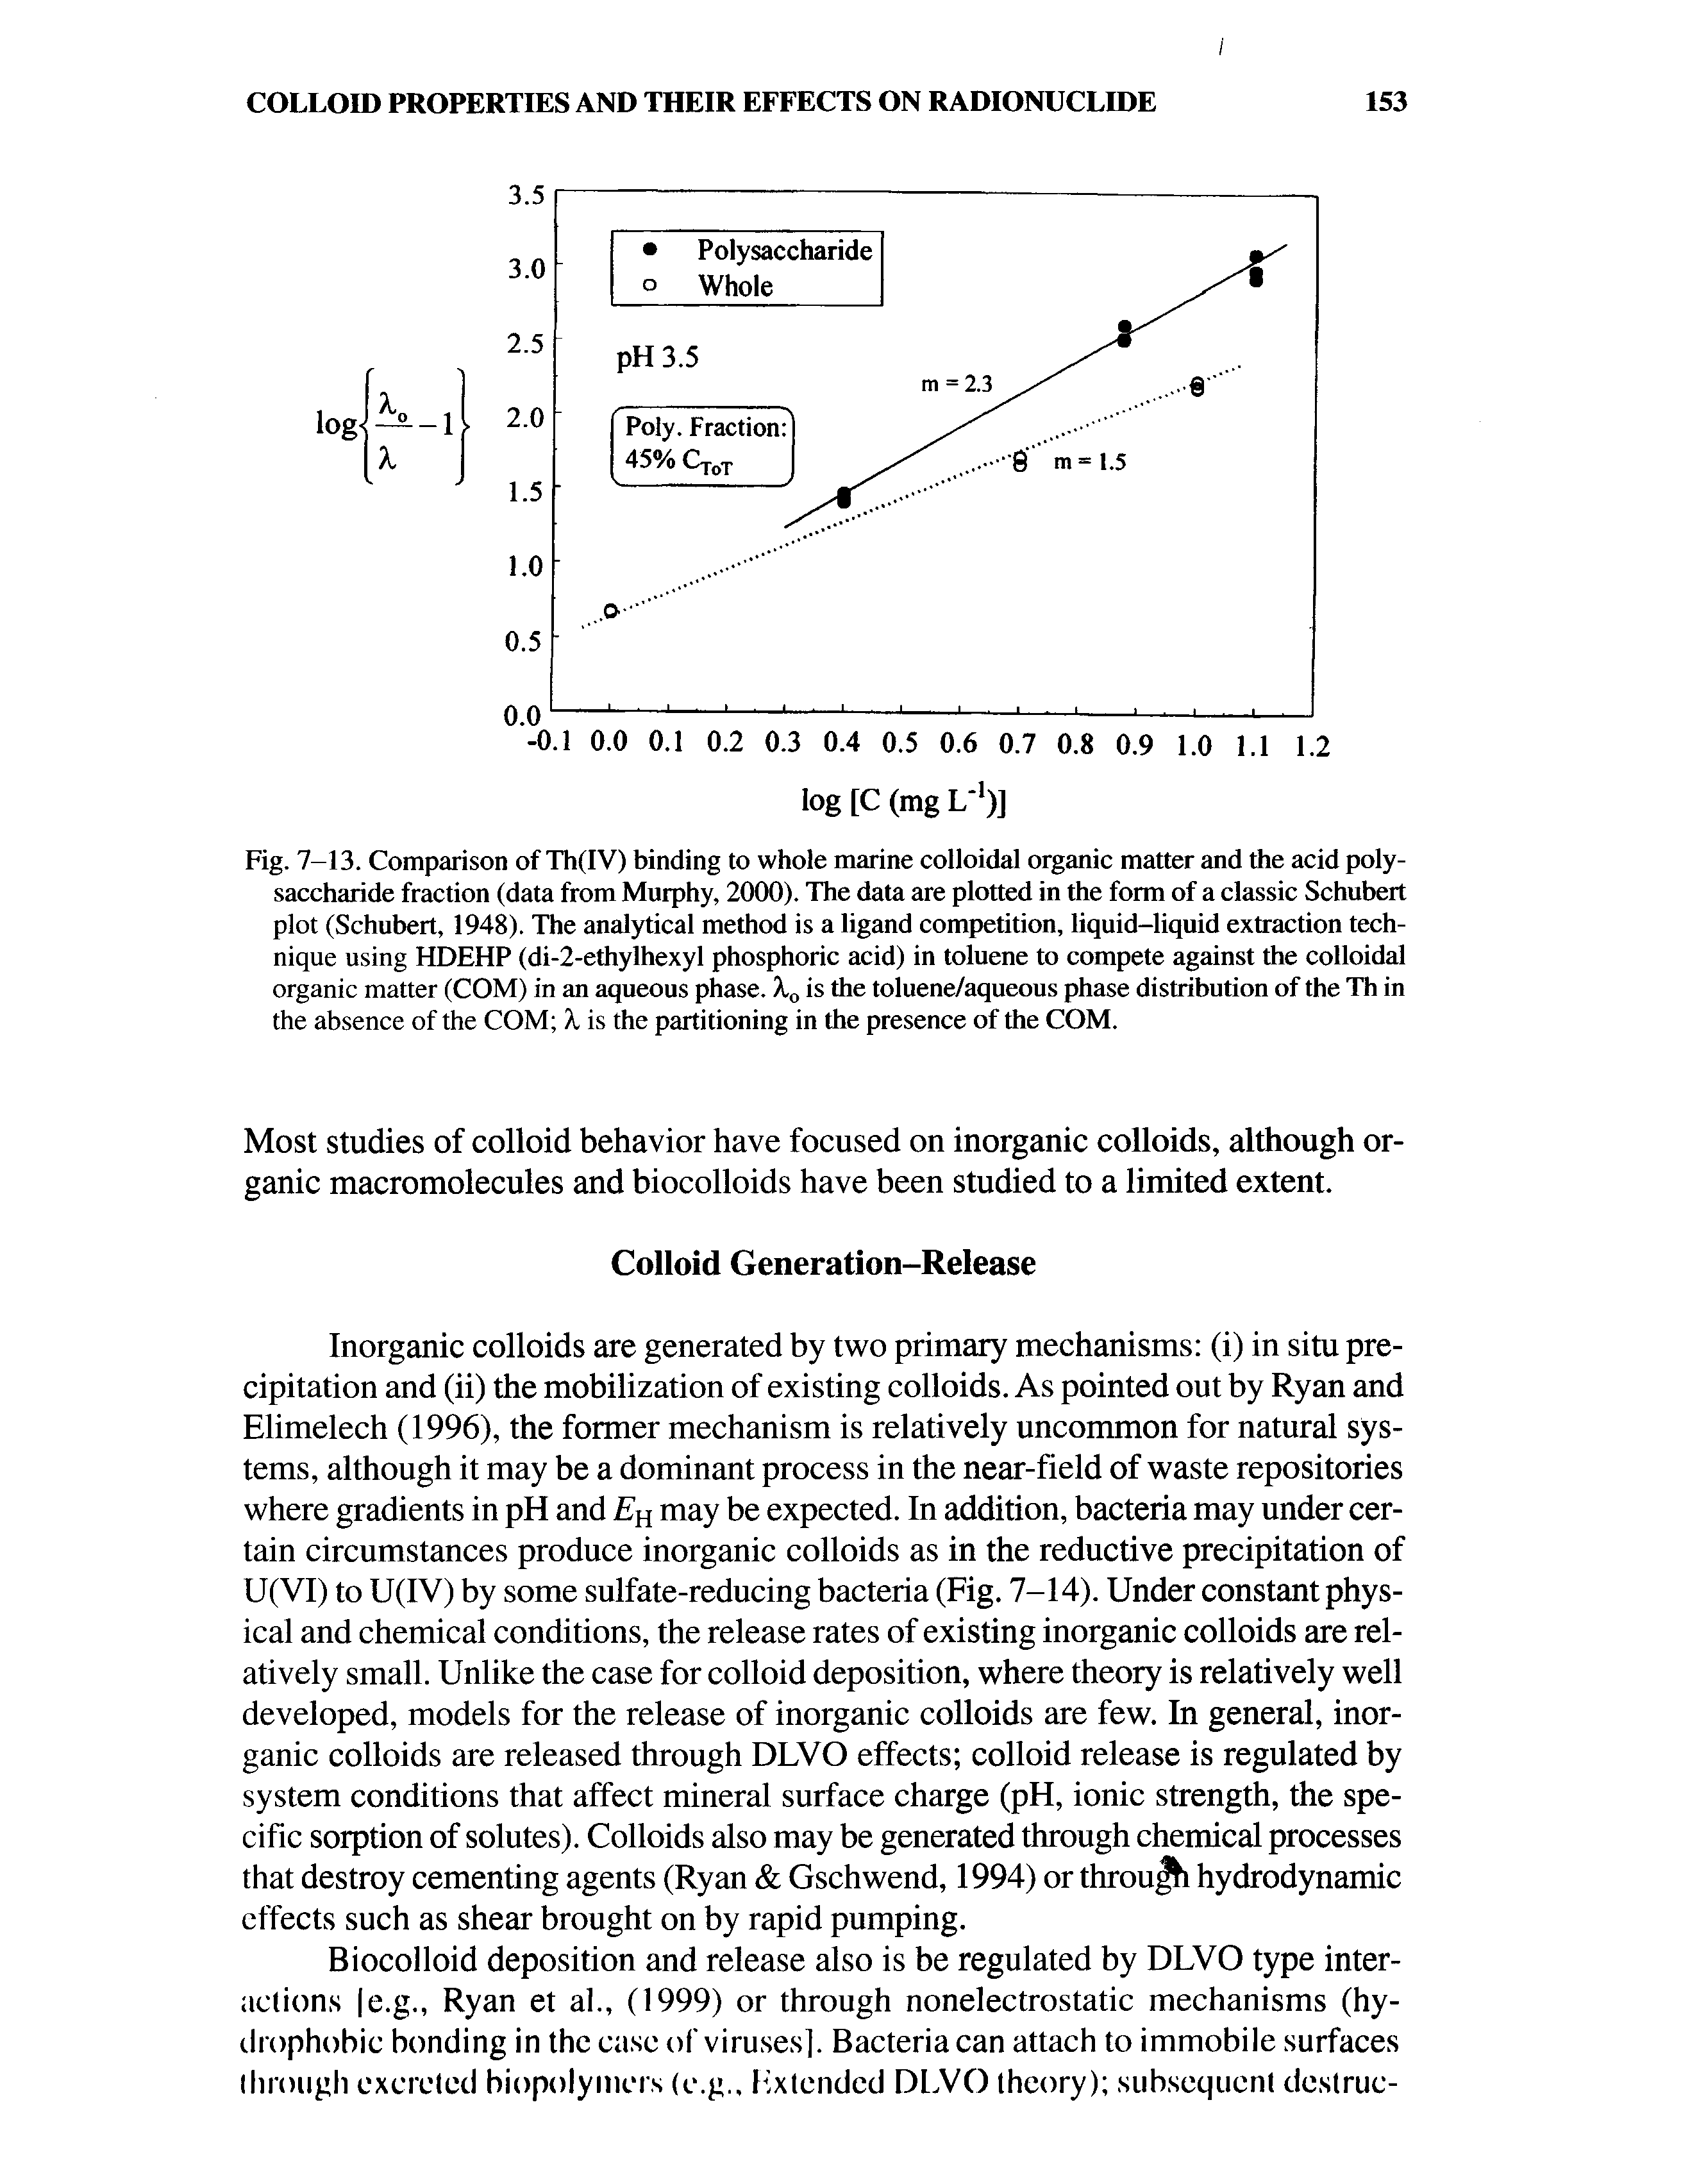 Fig. 7-13. Comparison of Th(IV) binding to whole marine colloidal organic matter and the acid polysaccharide fraction (data from Murphy, 2000). The data are plotted in the form of a classic Schubert plot (Schubert, 1948). The analytical method is a ligand competition, liquid-liquid extraction technique using HDEHP (di-2-ethylhexyl phosphoric acid) in toluene to compete against the colloidal organic matter (COM) in an aqueous phase. Xq is the toluene/aqueous phase distribution of the Th in the absence of the COM X is the partitioning in the presence of the COM.